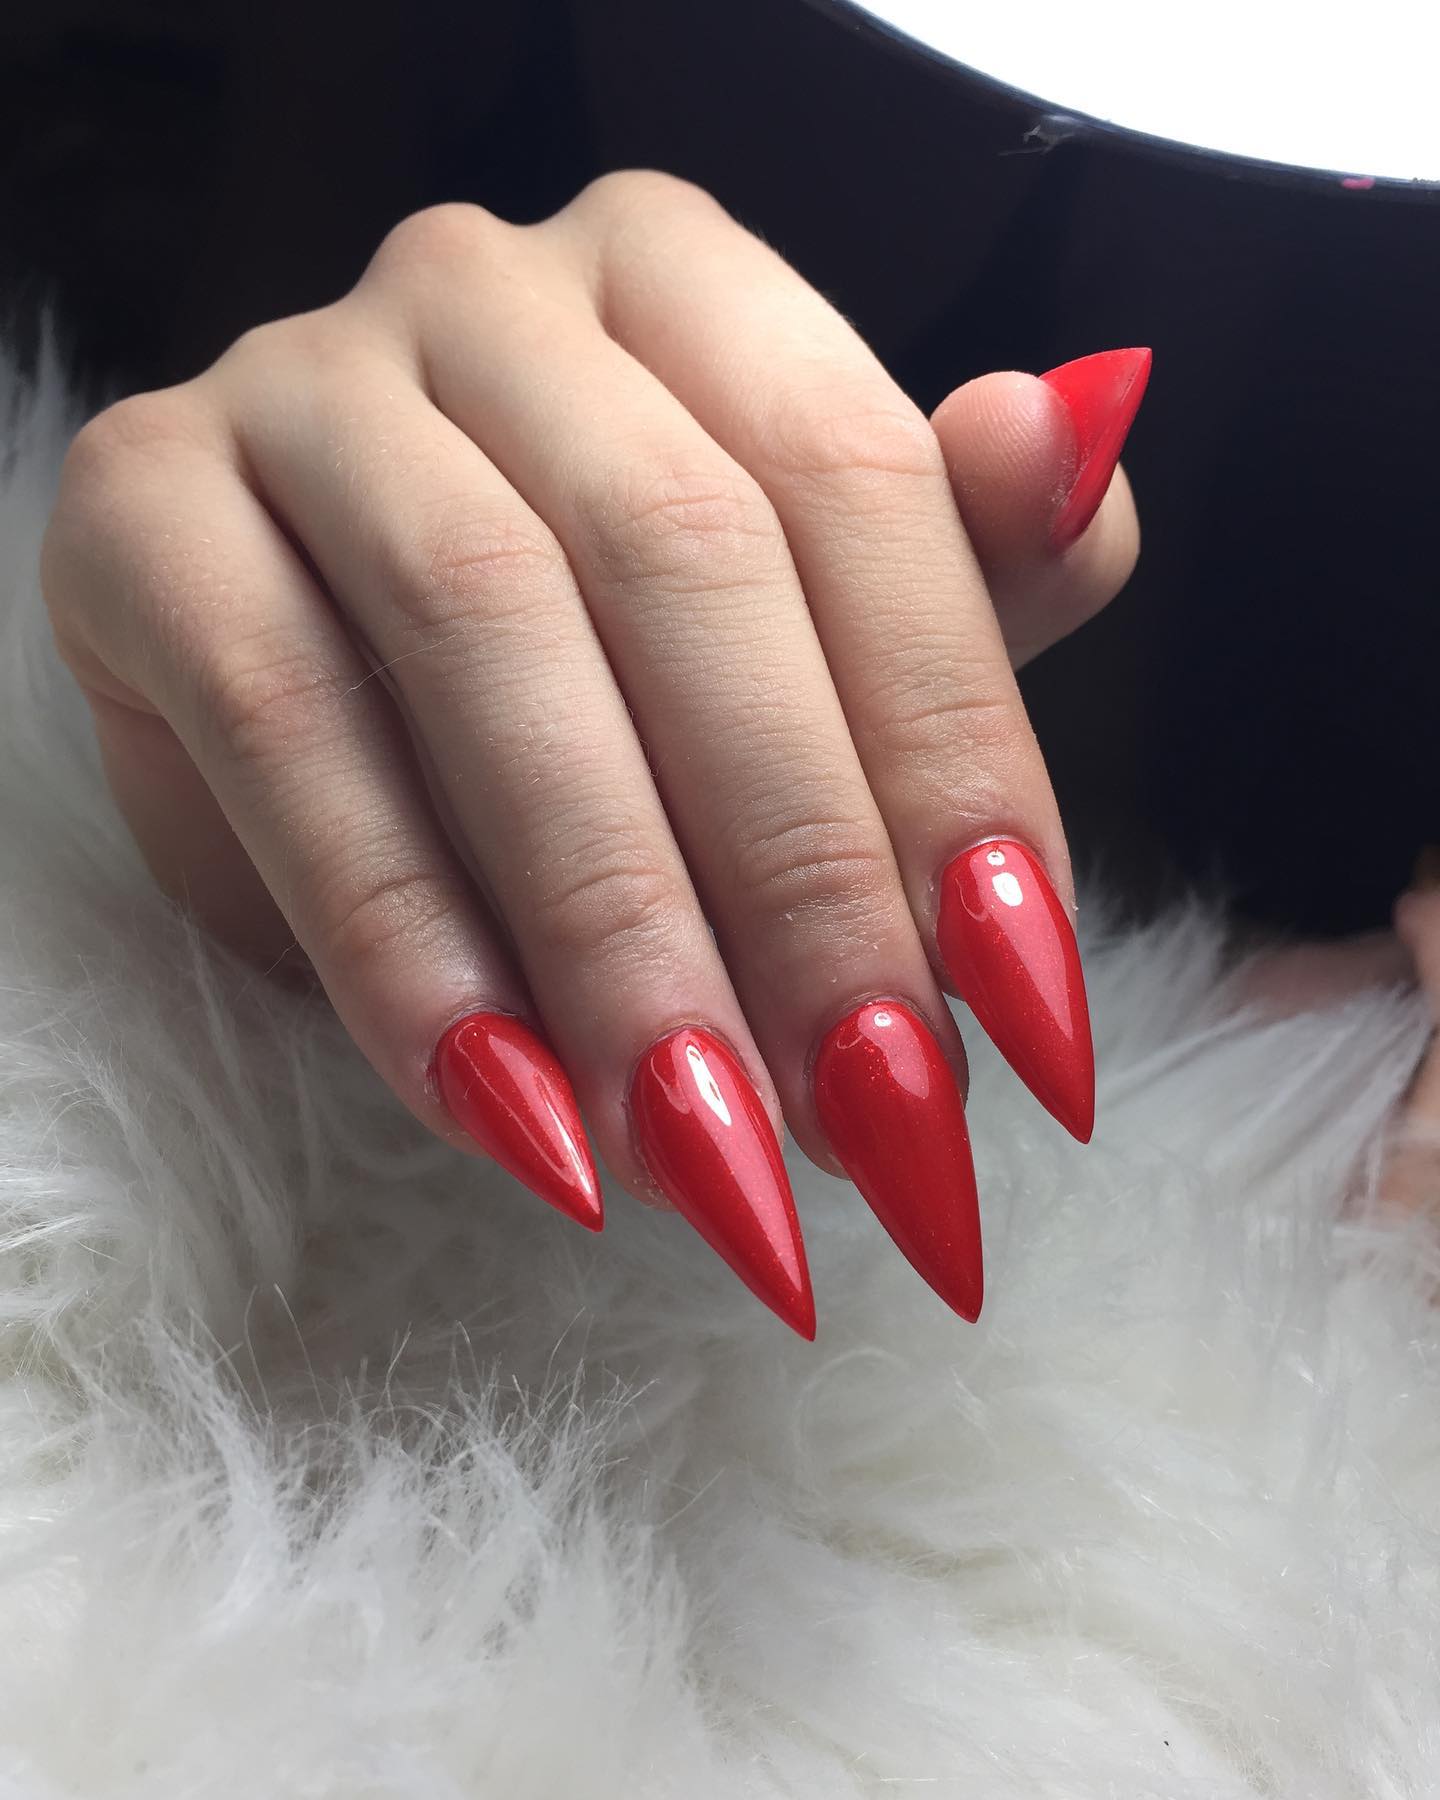  Who can say no to this shiny and sexy red stiletto nails? If you want to attract people, give it a shot.